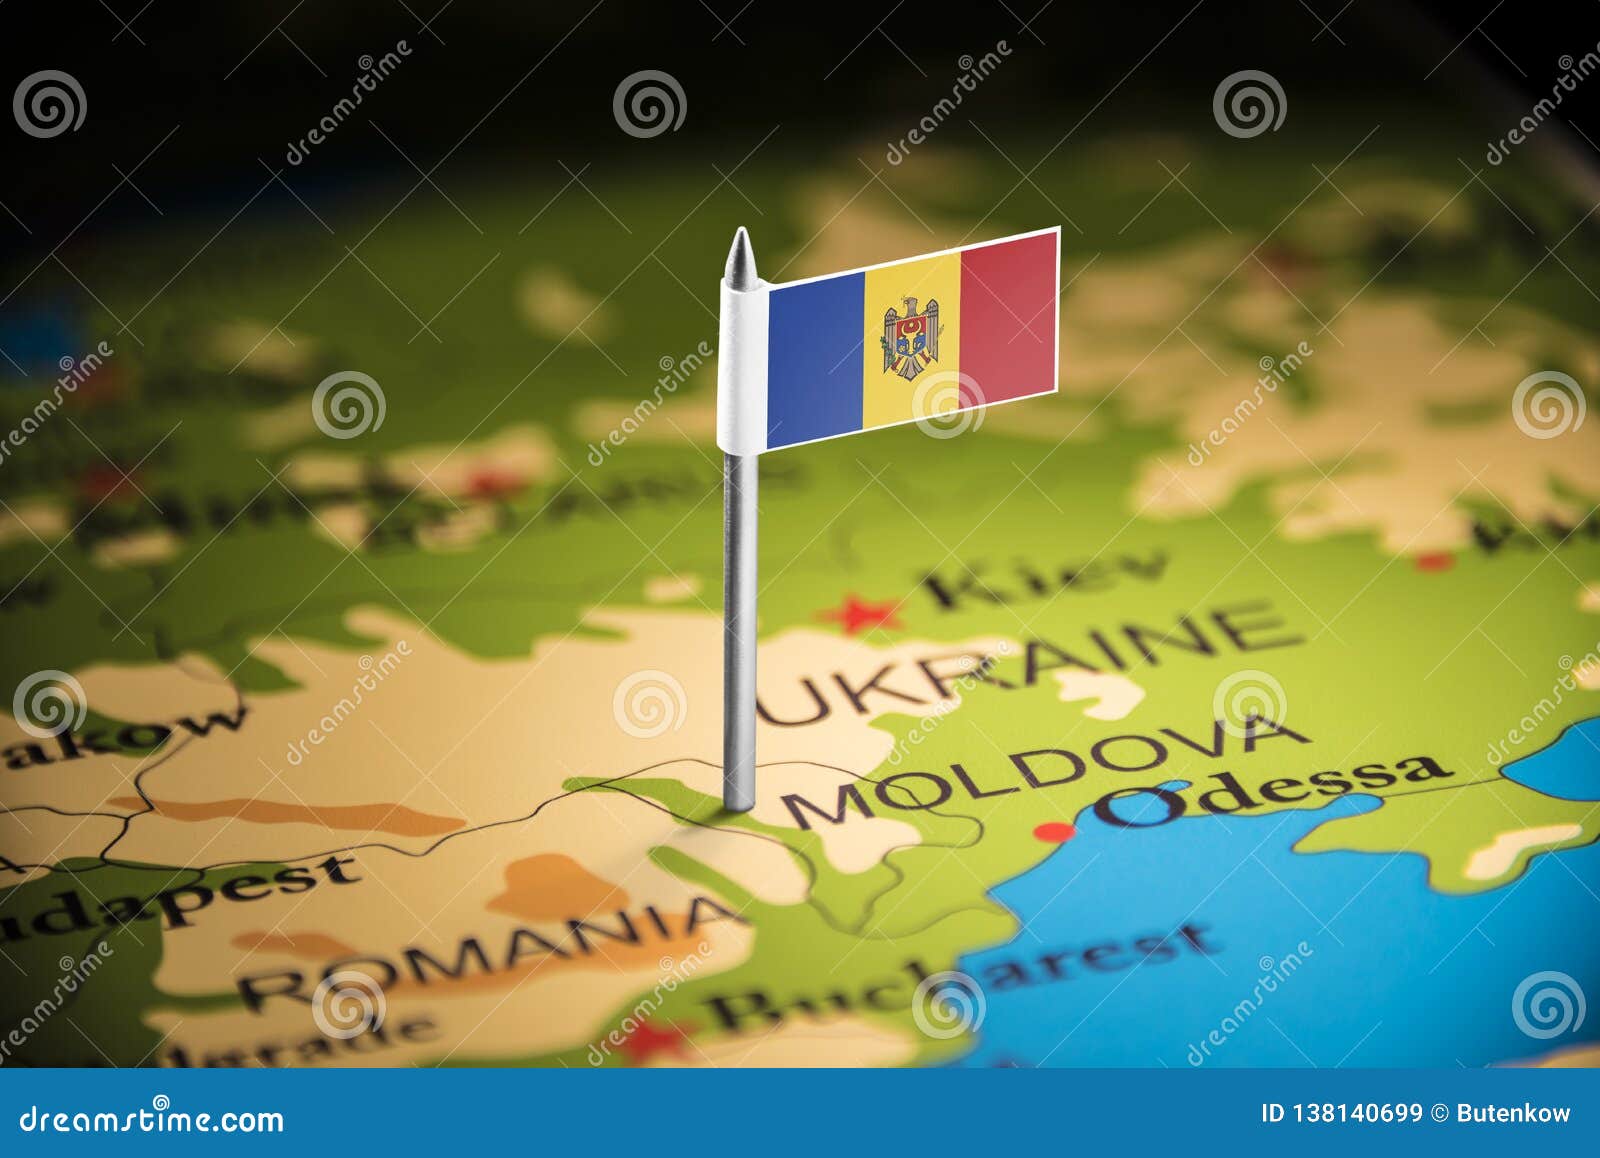 moldova marked with a flag on the map